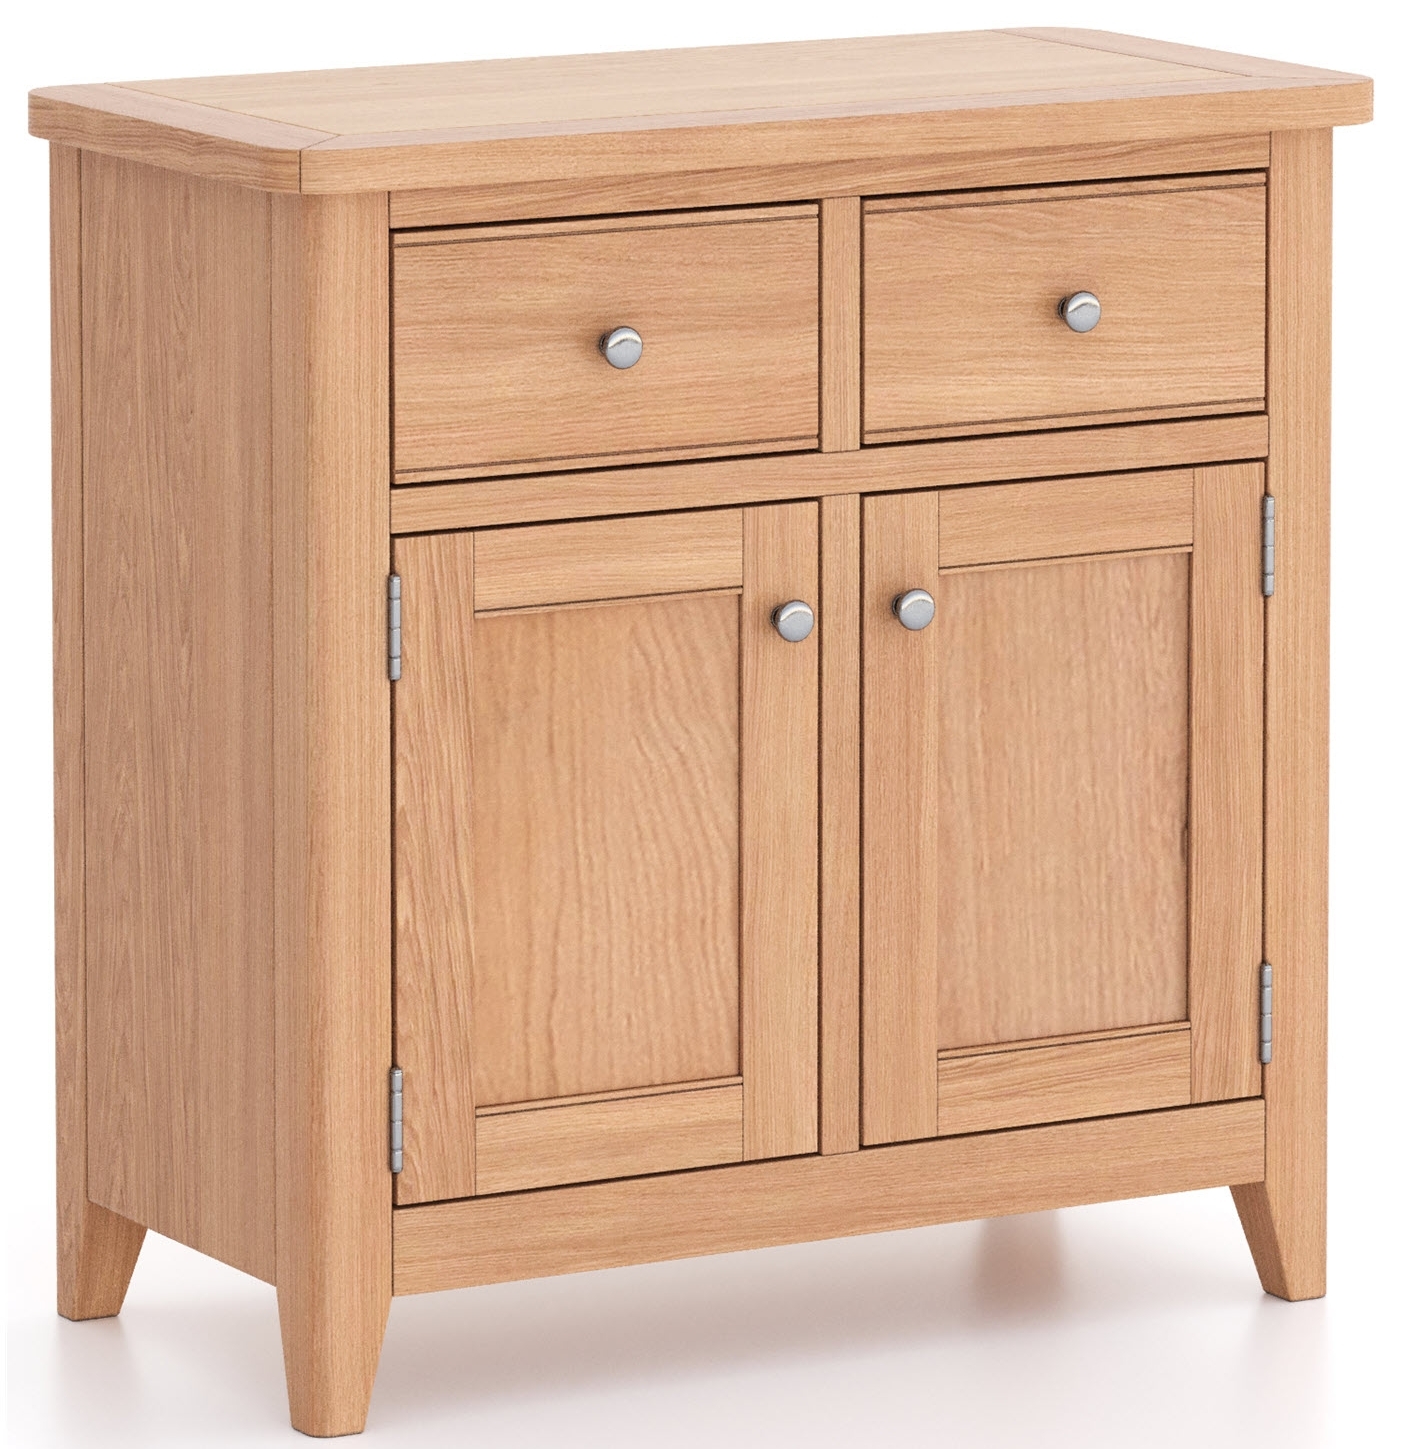 Arden Small Sideboard 75cm With 2 Doors And 2 Drawers